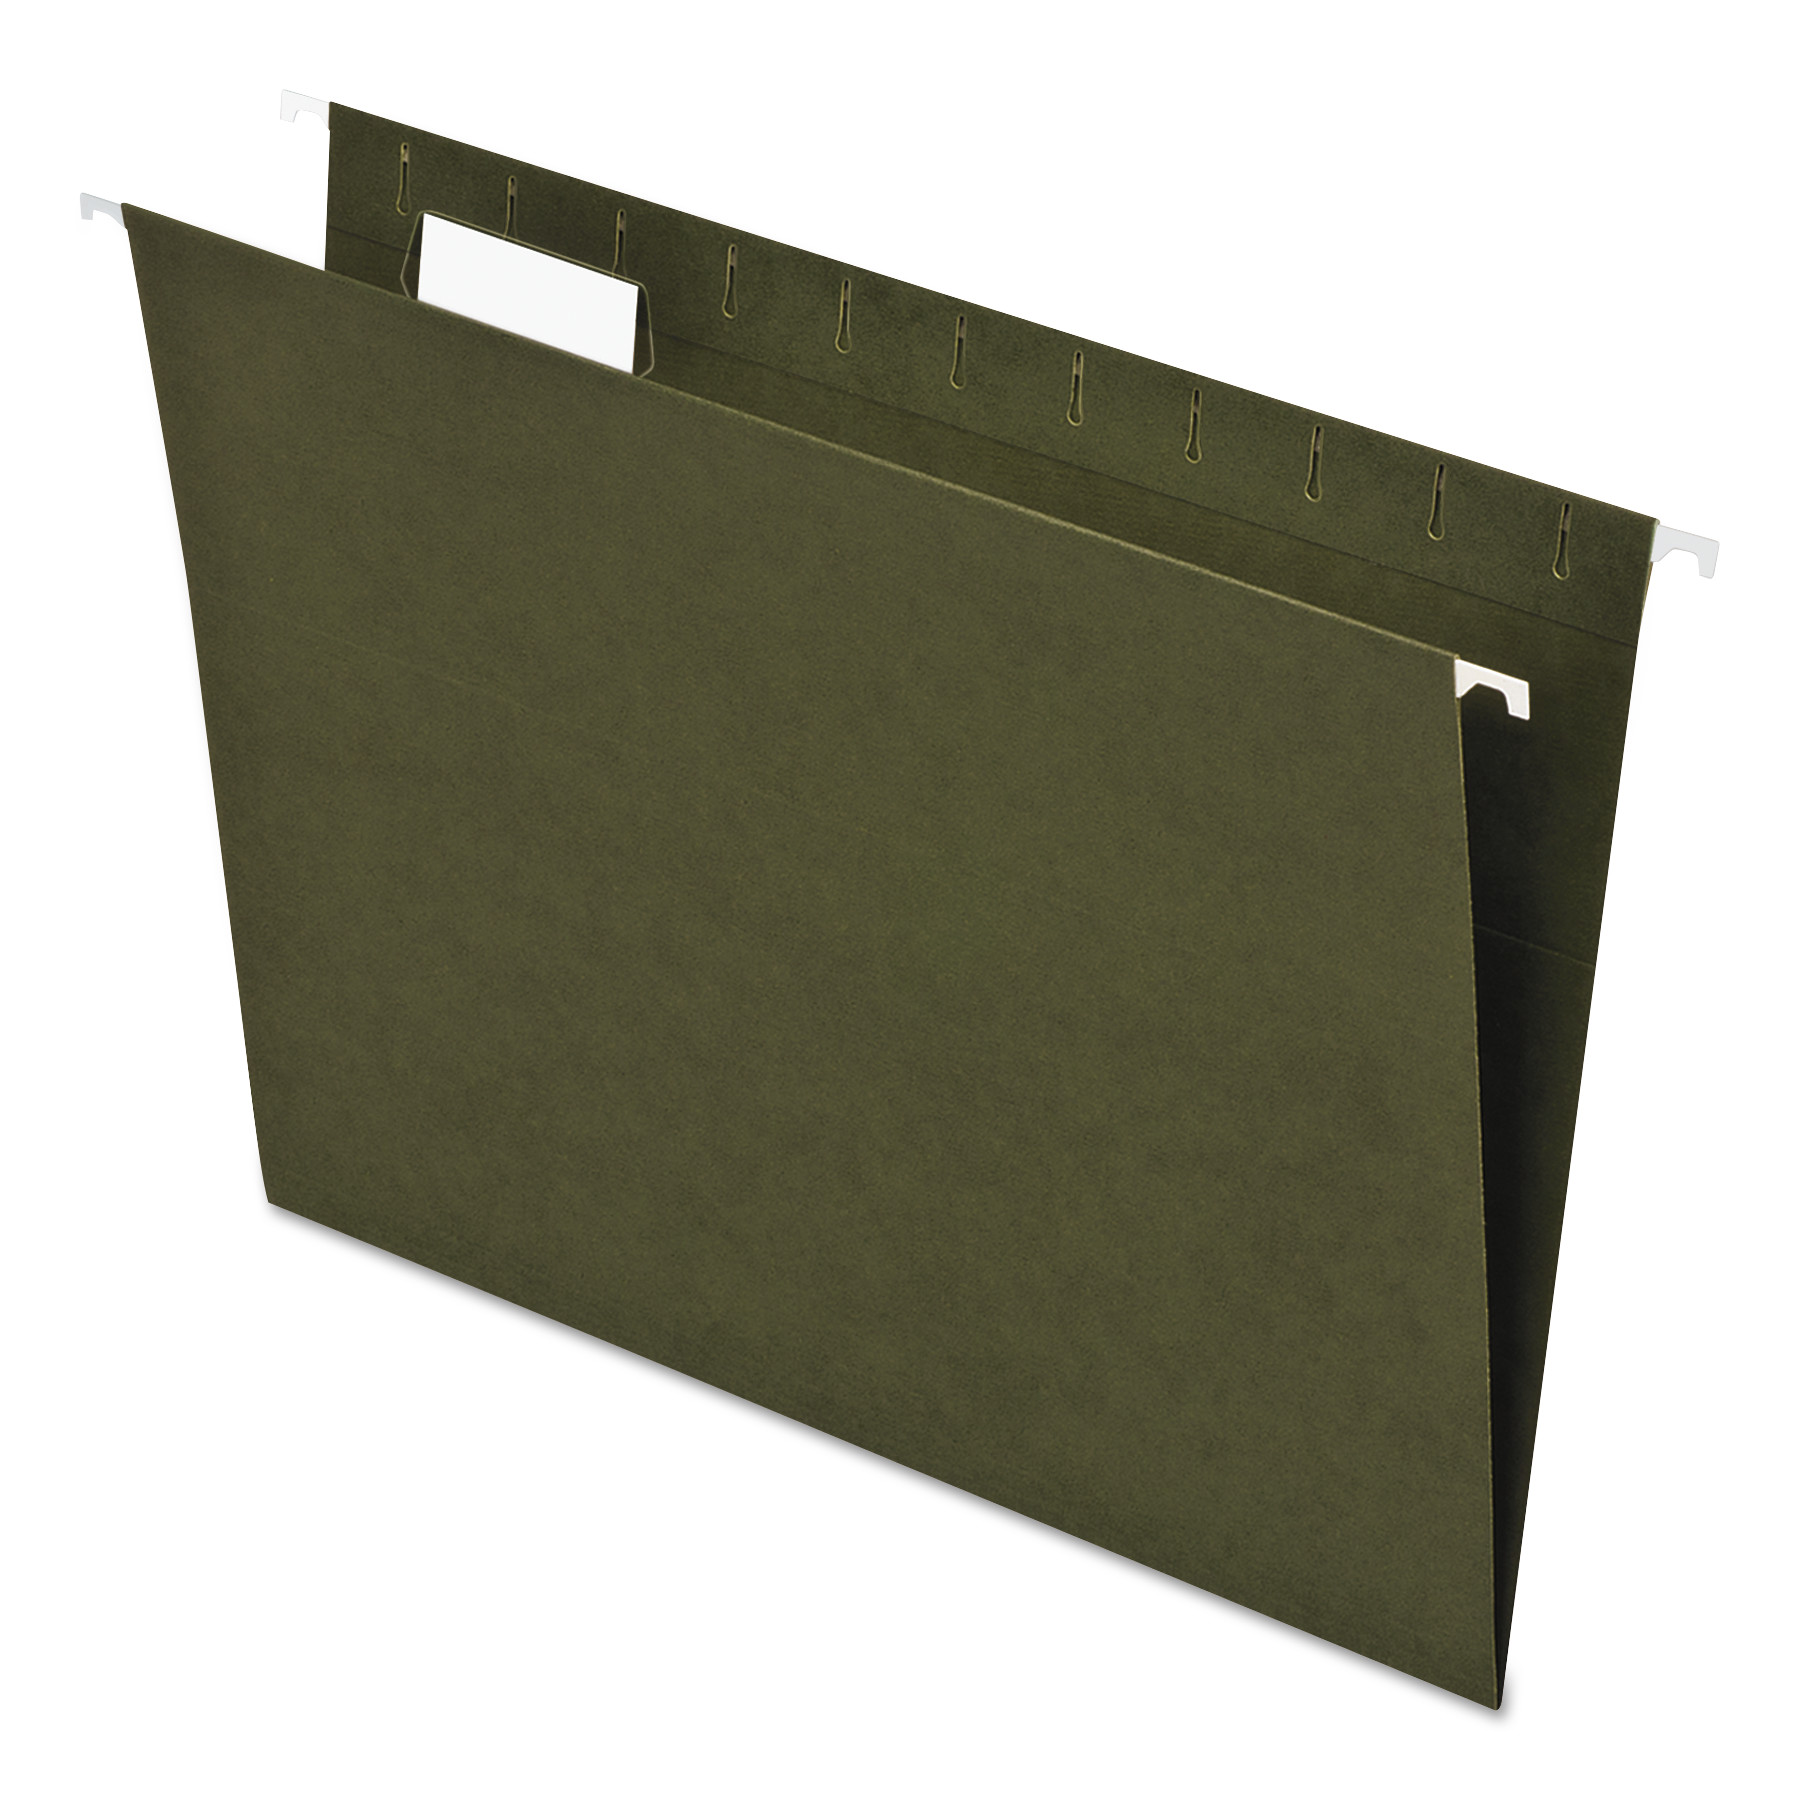  Pendaflex 74517 Earthwise by Pendaflex 100% Recycled Colored Hanging File Folders, Letter Size, 1/5-Cut Tab, Green, 25/Box (PFX74517) 